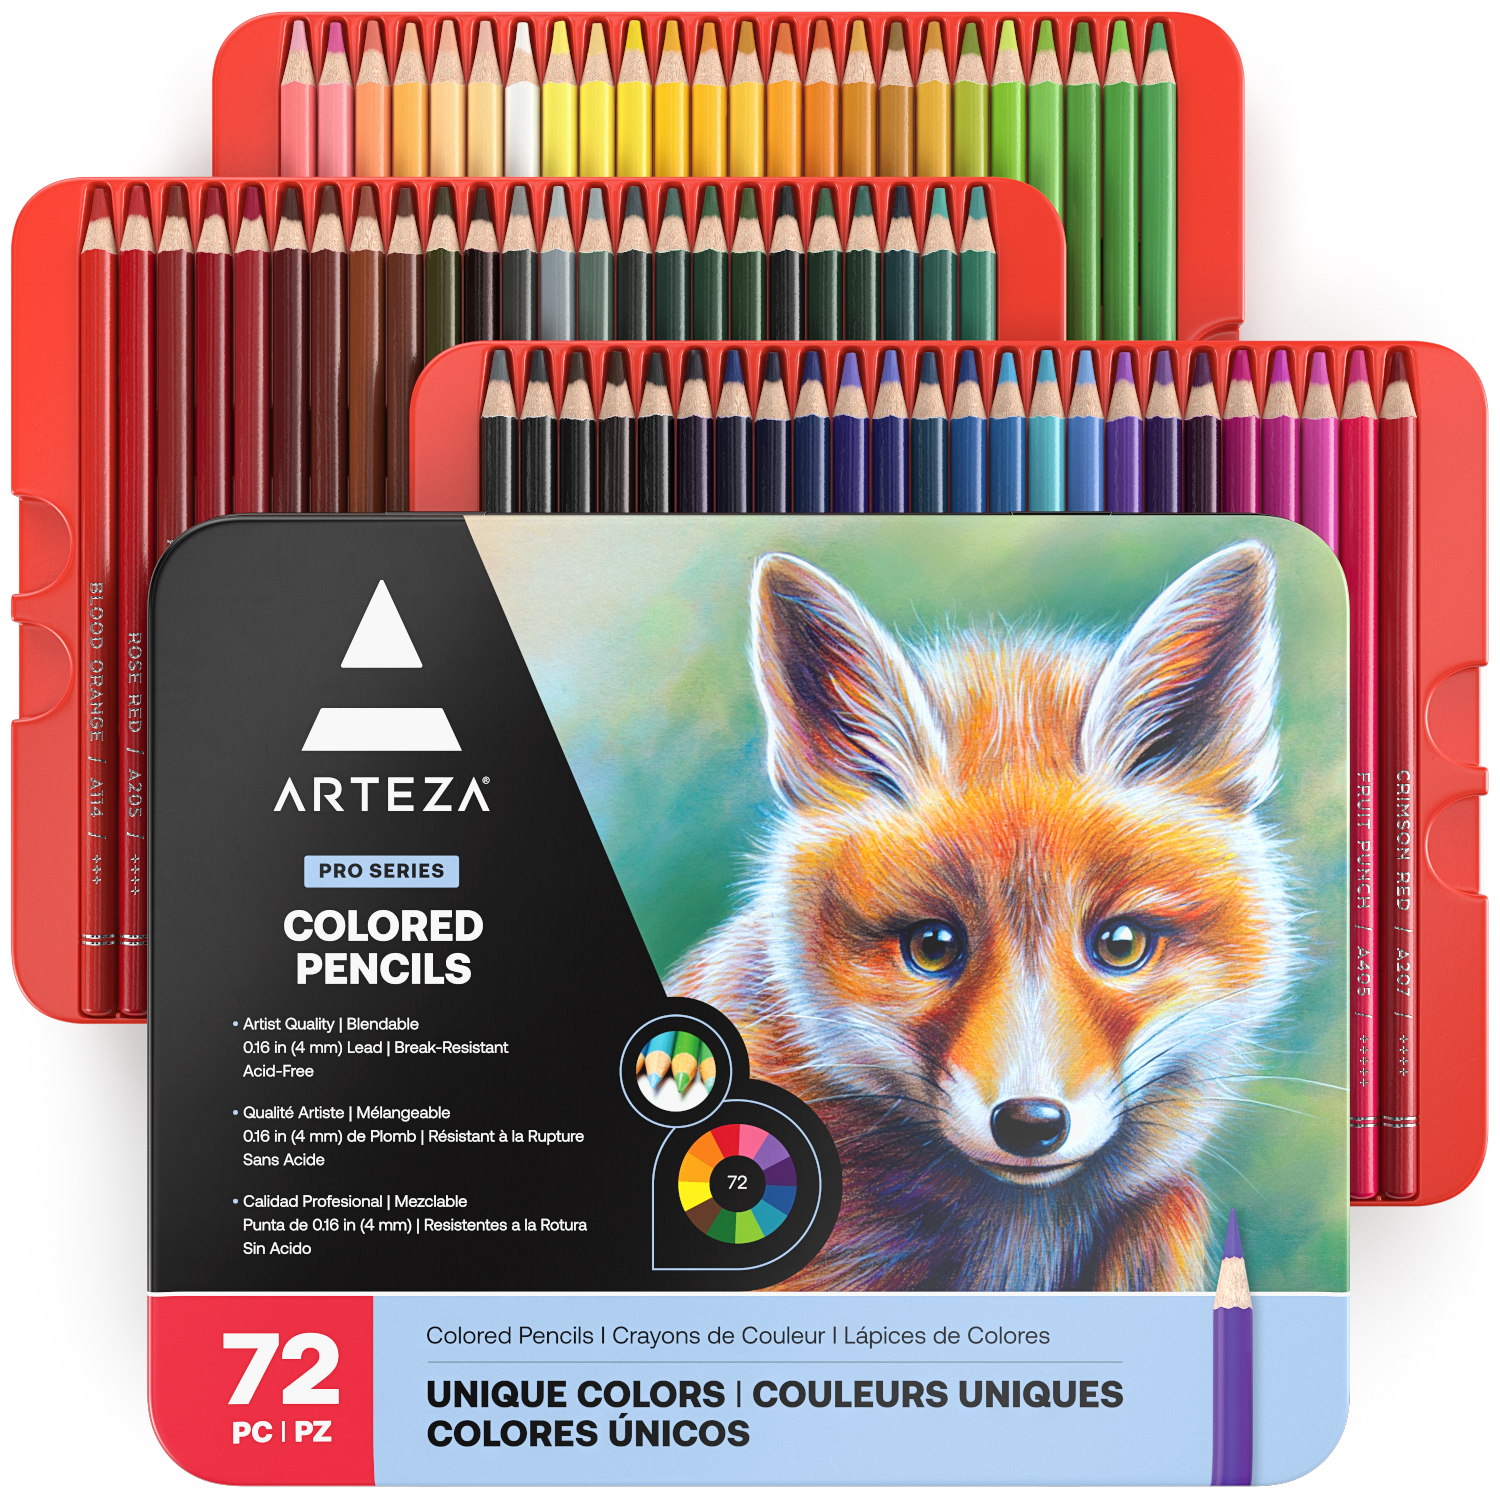 How to Choose the Right Colouring Pencil